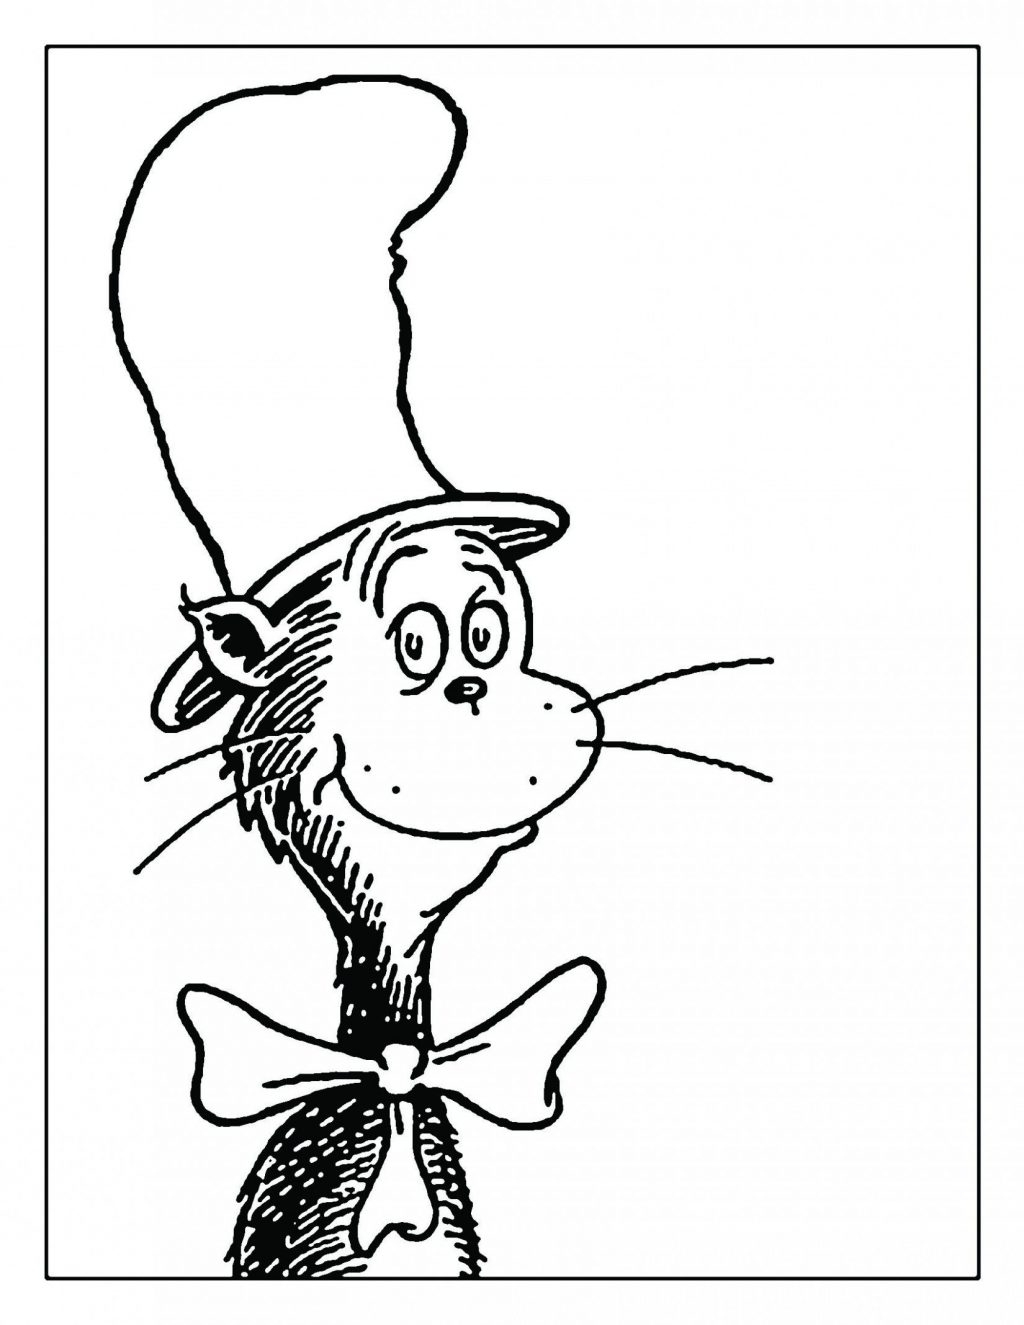 Coloring Pages ~ Coloring Pages Dr Seuss Free Printable Suess And - Free Printable Dr Seuss Coloring Pages